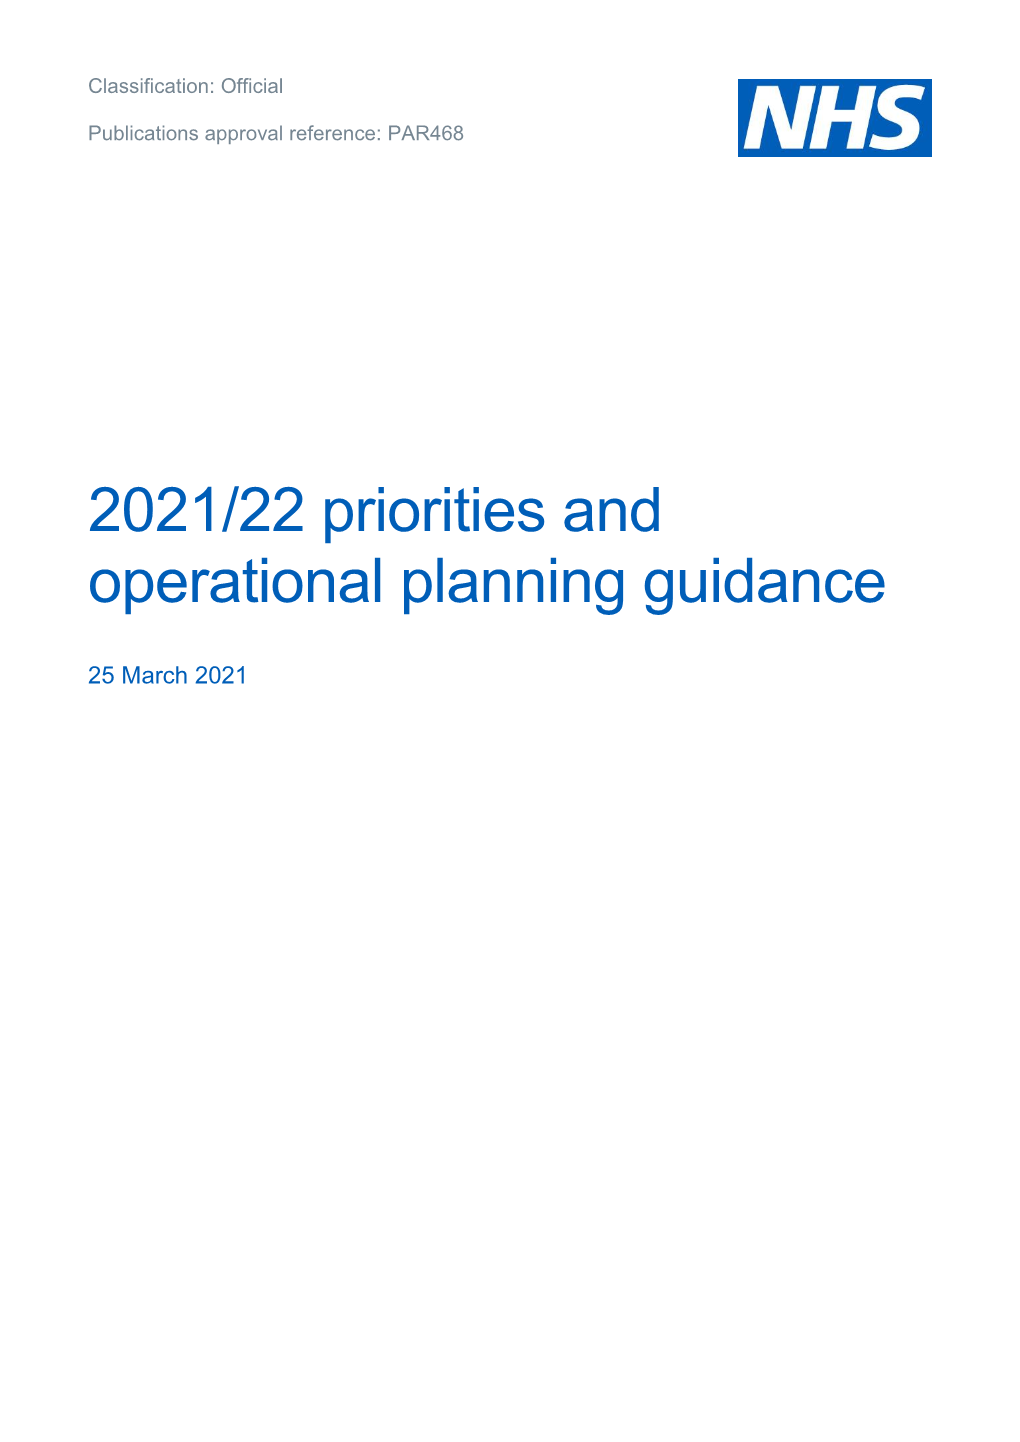 2021/22 Priorities and Operational Planning Guidance